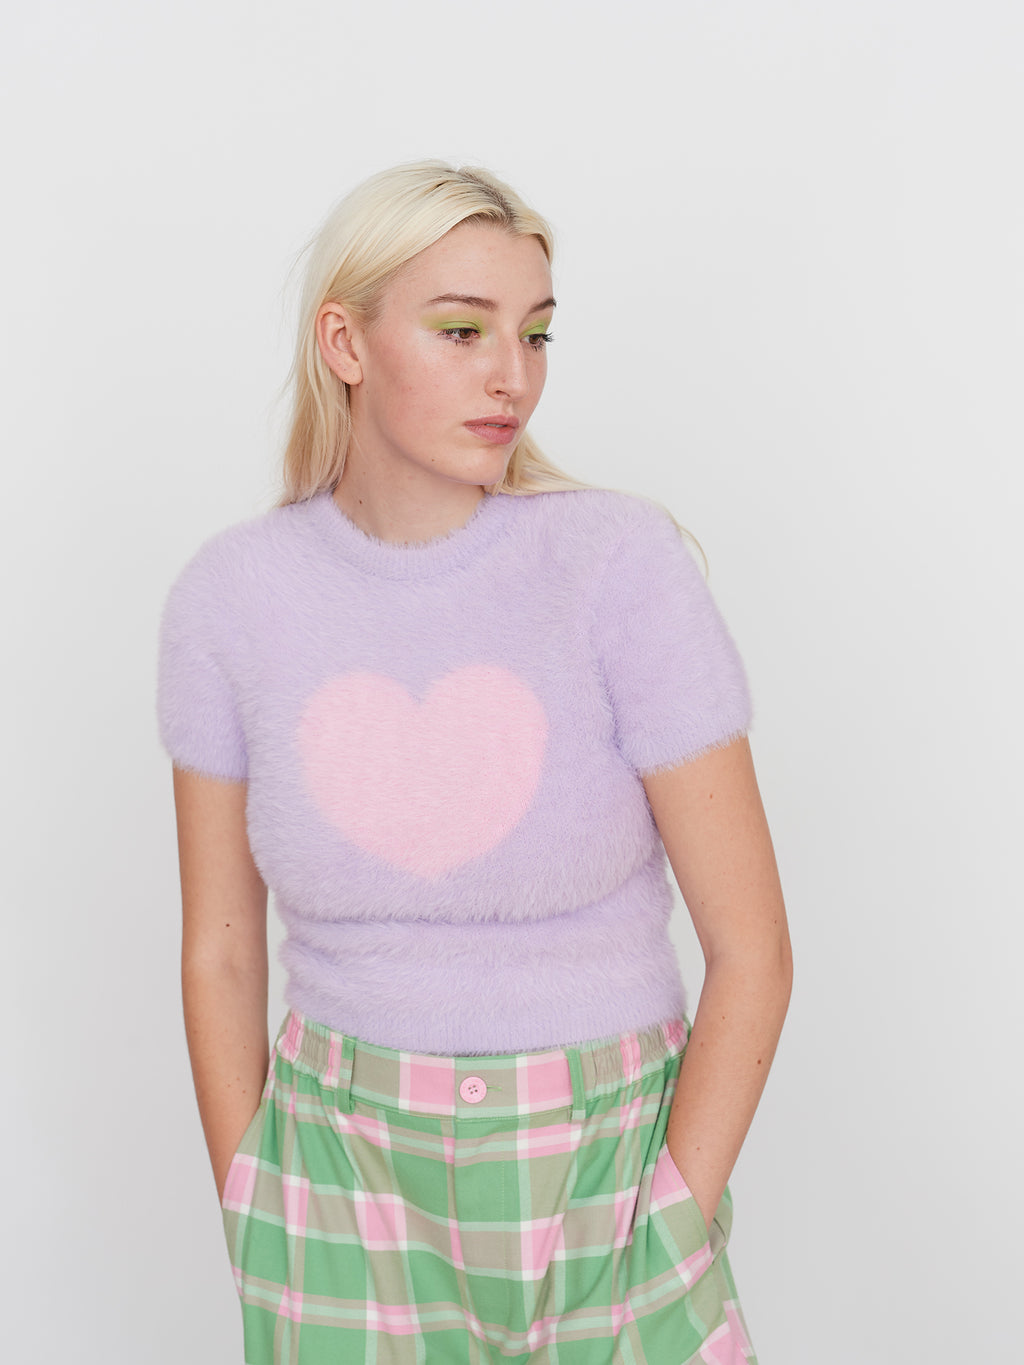 Heavy Heart Knitted Top